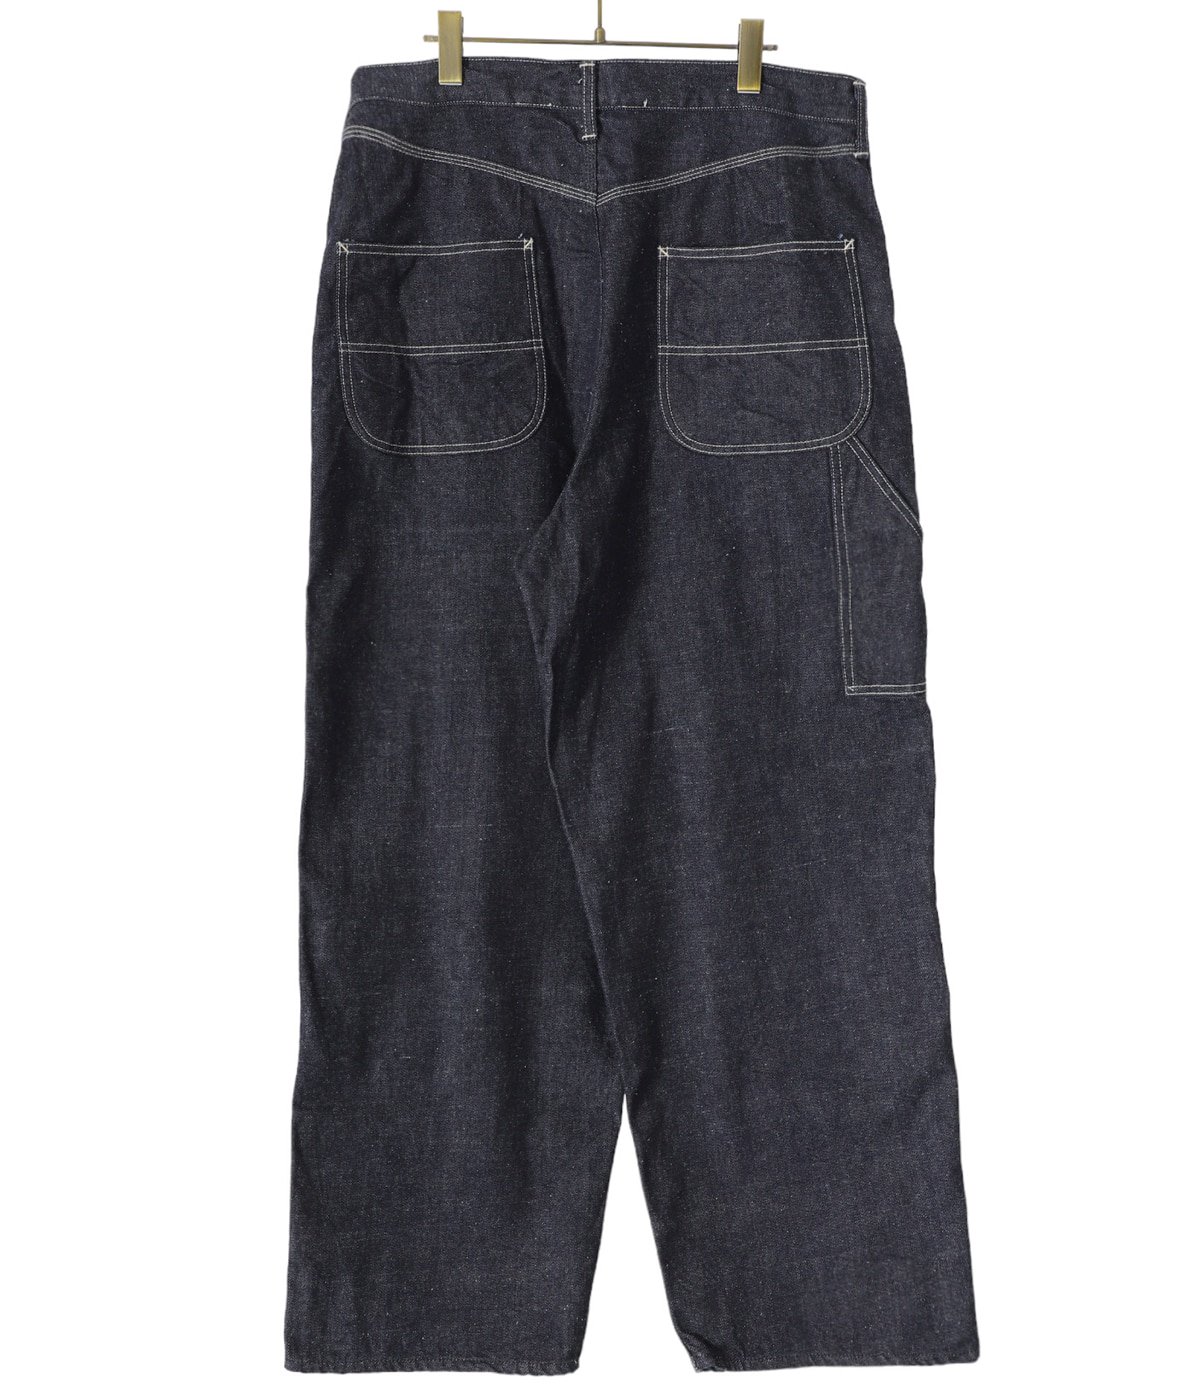 RECYCLED WASTE SUVIN COTTON YARN 11.5oz. DENIM PAINTER PANTS ...